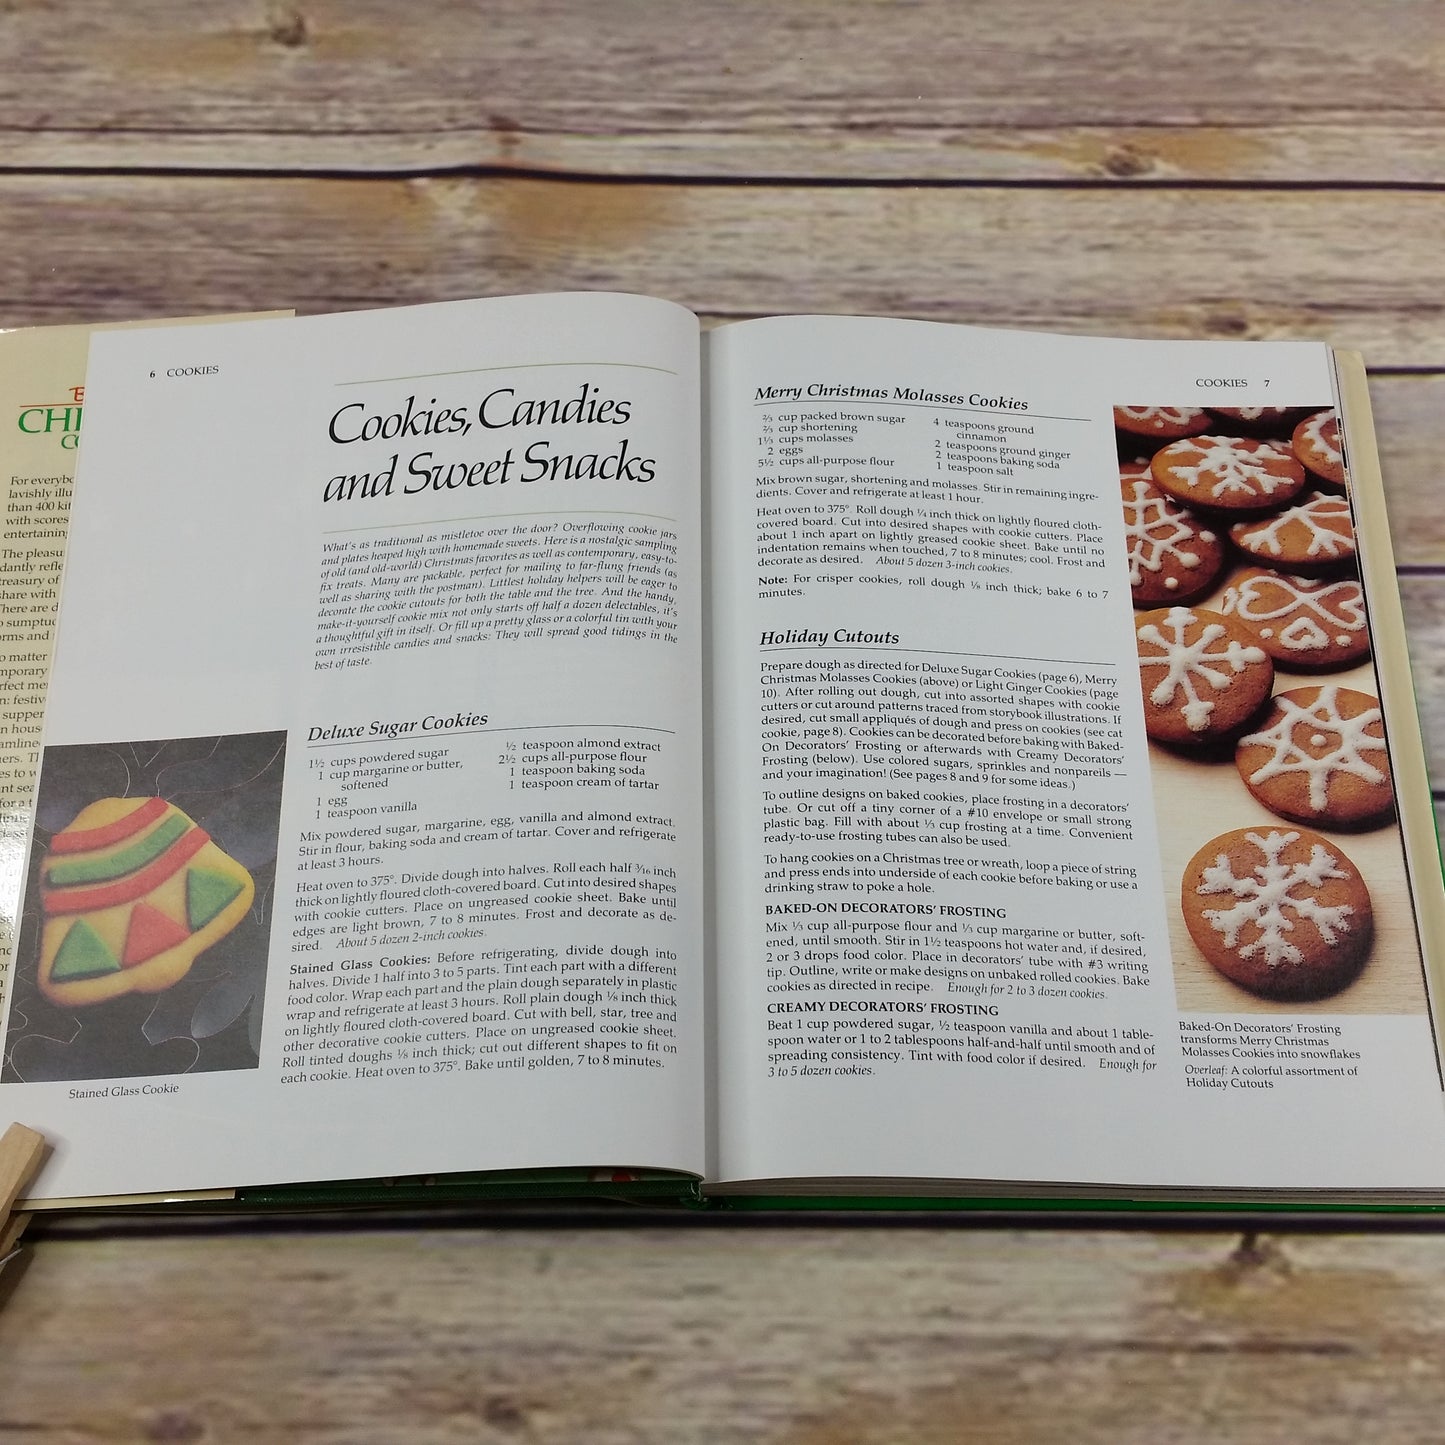 Vintage Cookbook Betty Crockers Christmas 1982 Hardcover with Dust Jacket Cookies Desserts Christmas Day Dinners - At Grandma's Table